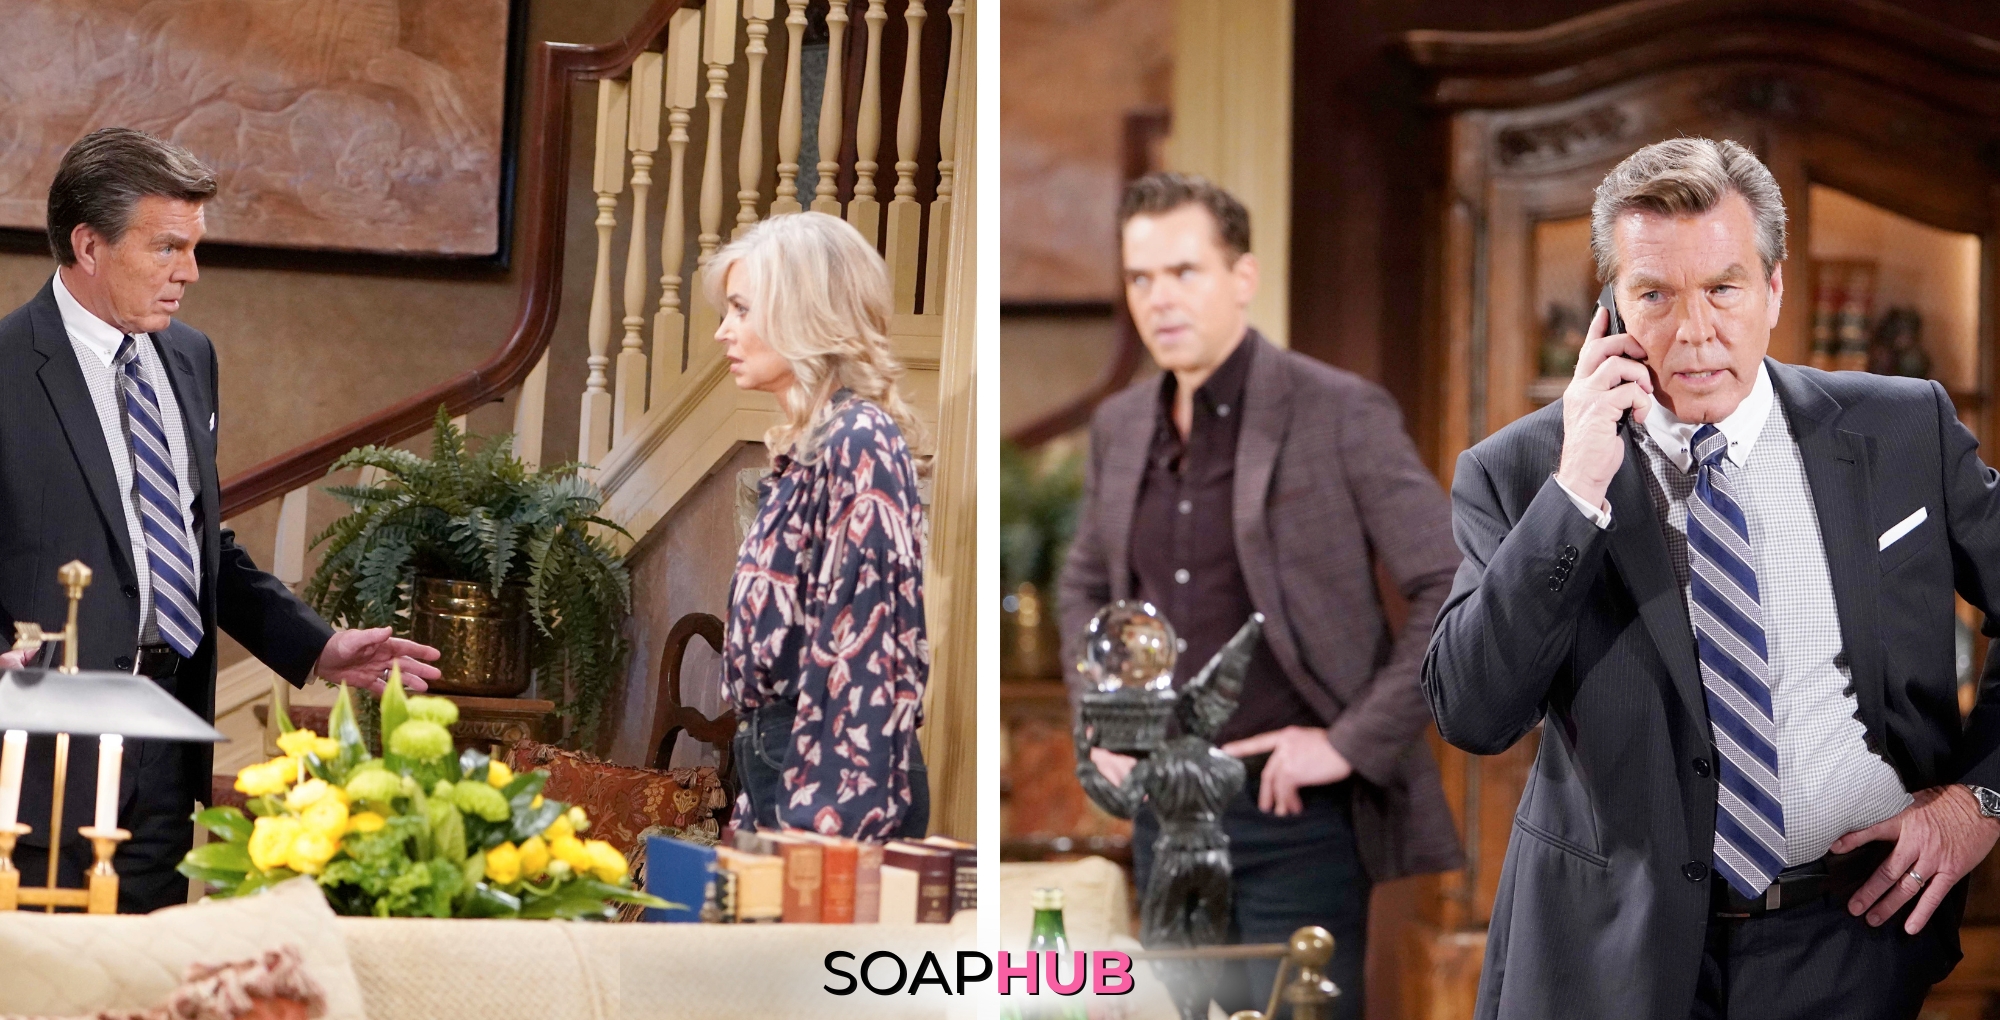 The Young and the Restless spoilers for April 11 feature Jack, Ashley, and Billy with the Soap Hub logo across the bottom.